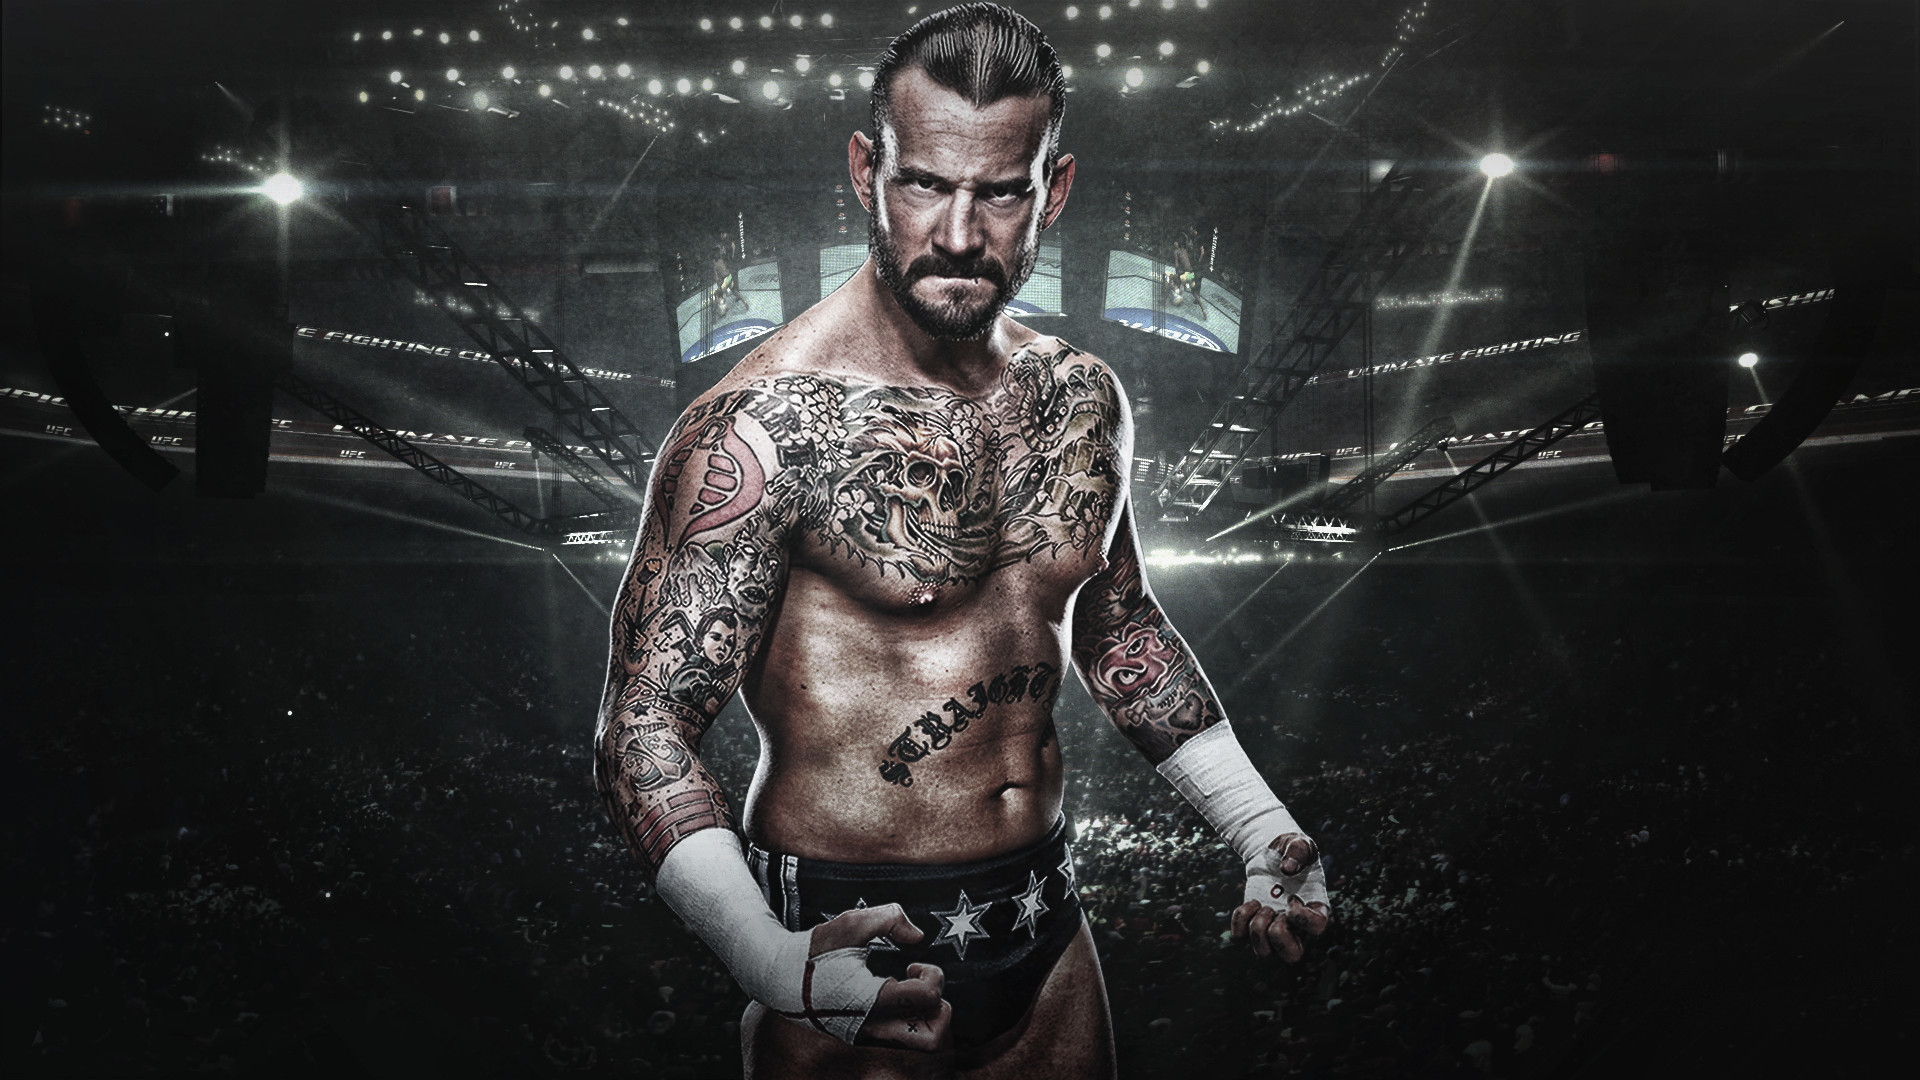 1920x1080 CM Punk UFC Wallpaper(Ethereal)() by EtherealEdition